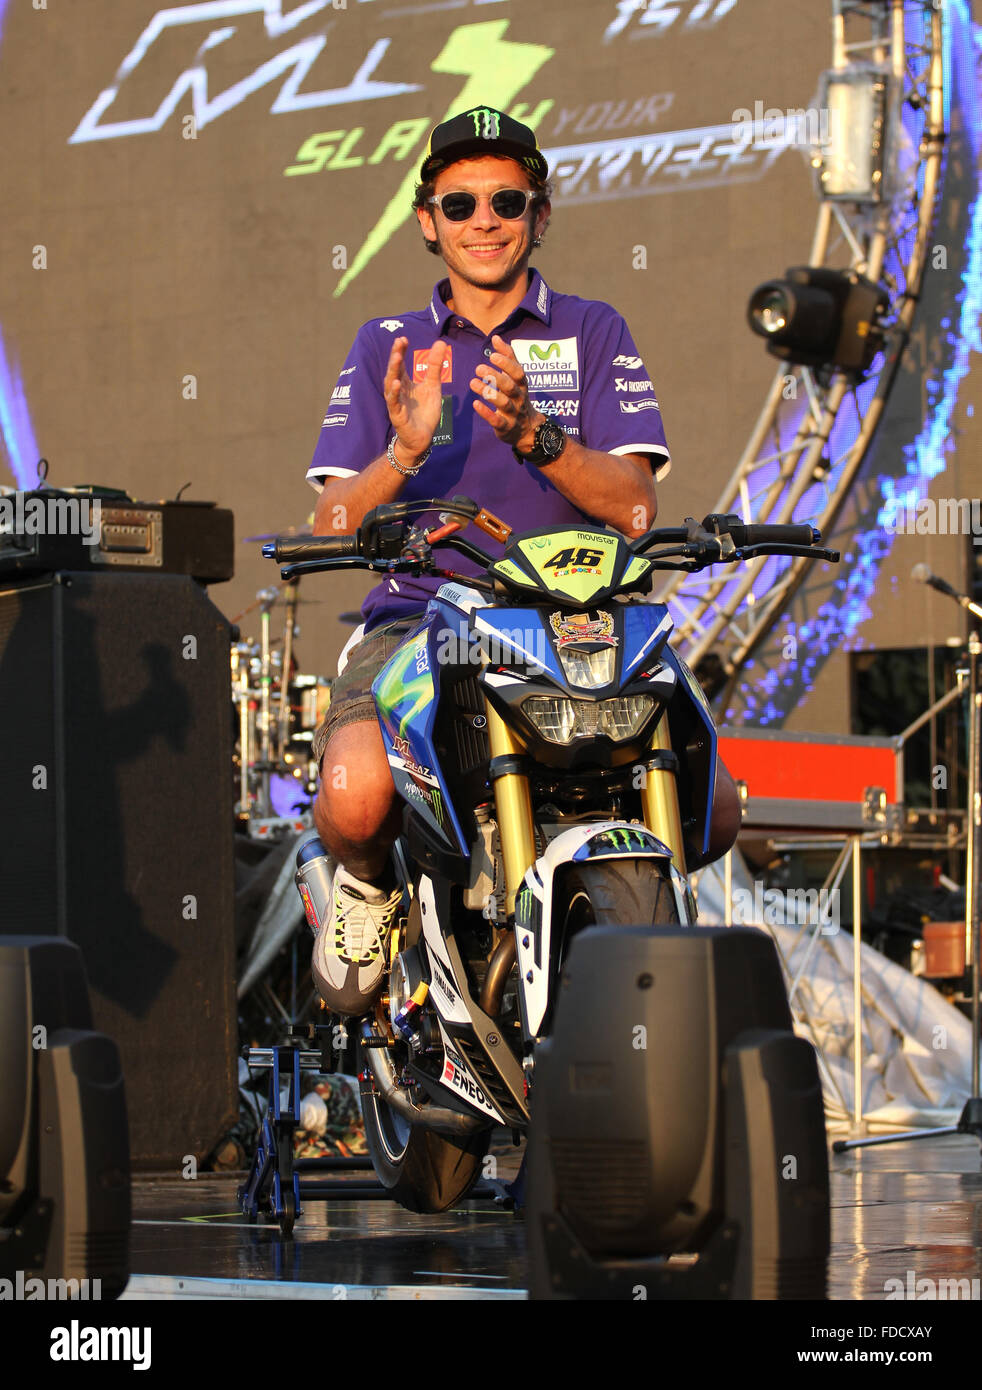 Bangkok, Thailand. 30th Jan, 2016. Valentino Rossi riding a motorcycle show  for his fans on stage during Yamaha motor Thailand organized for Valentino  Rossi fan Club Moto GP World Champion Professional version